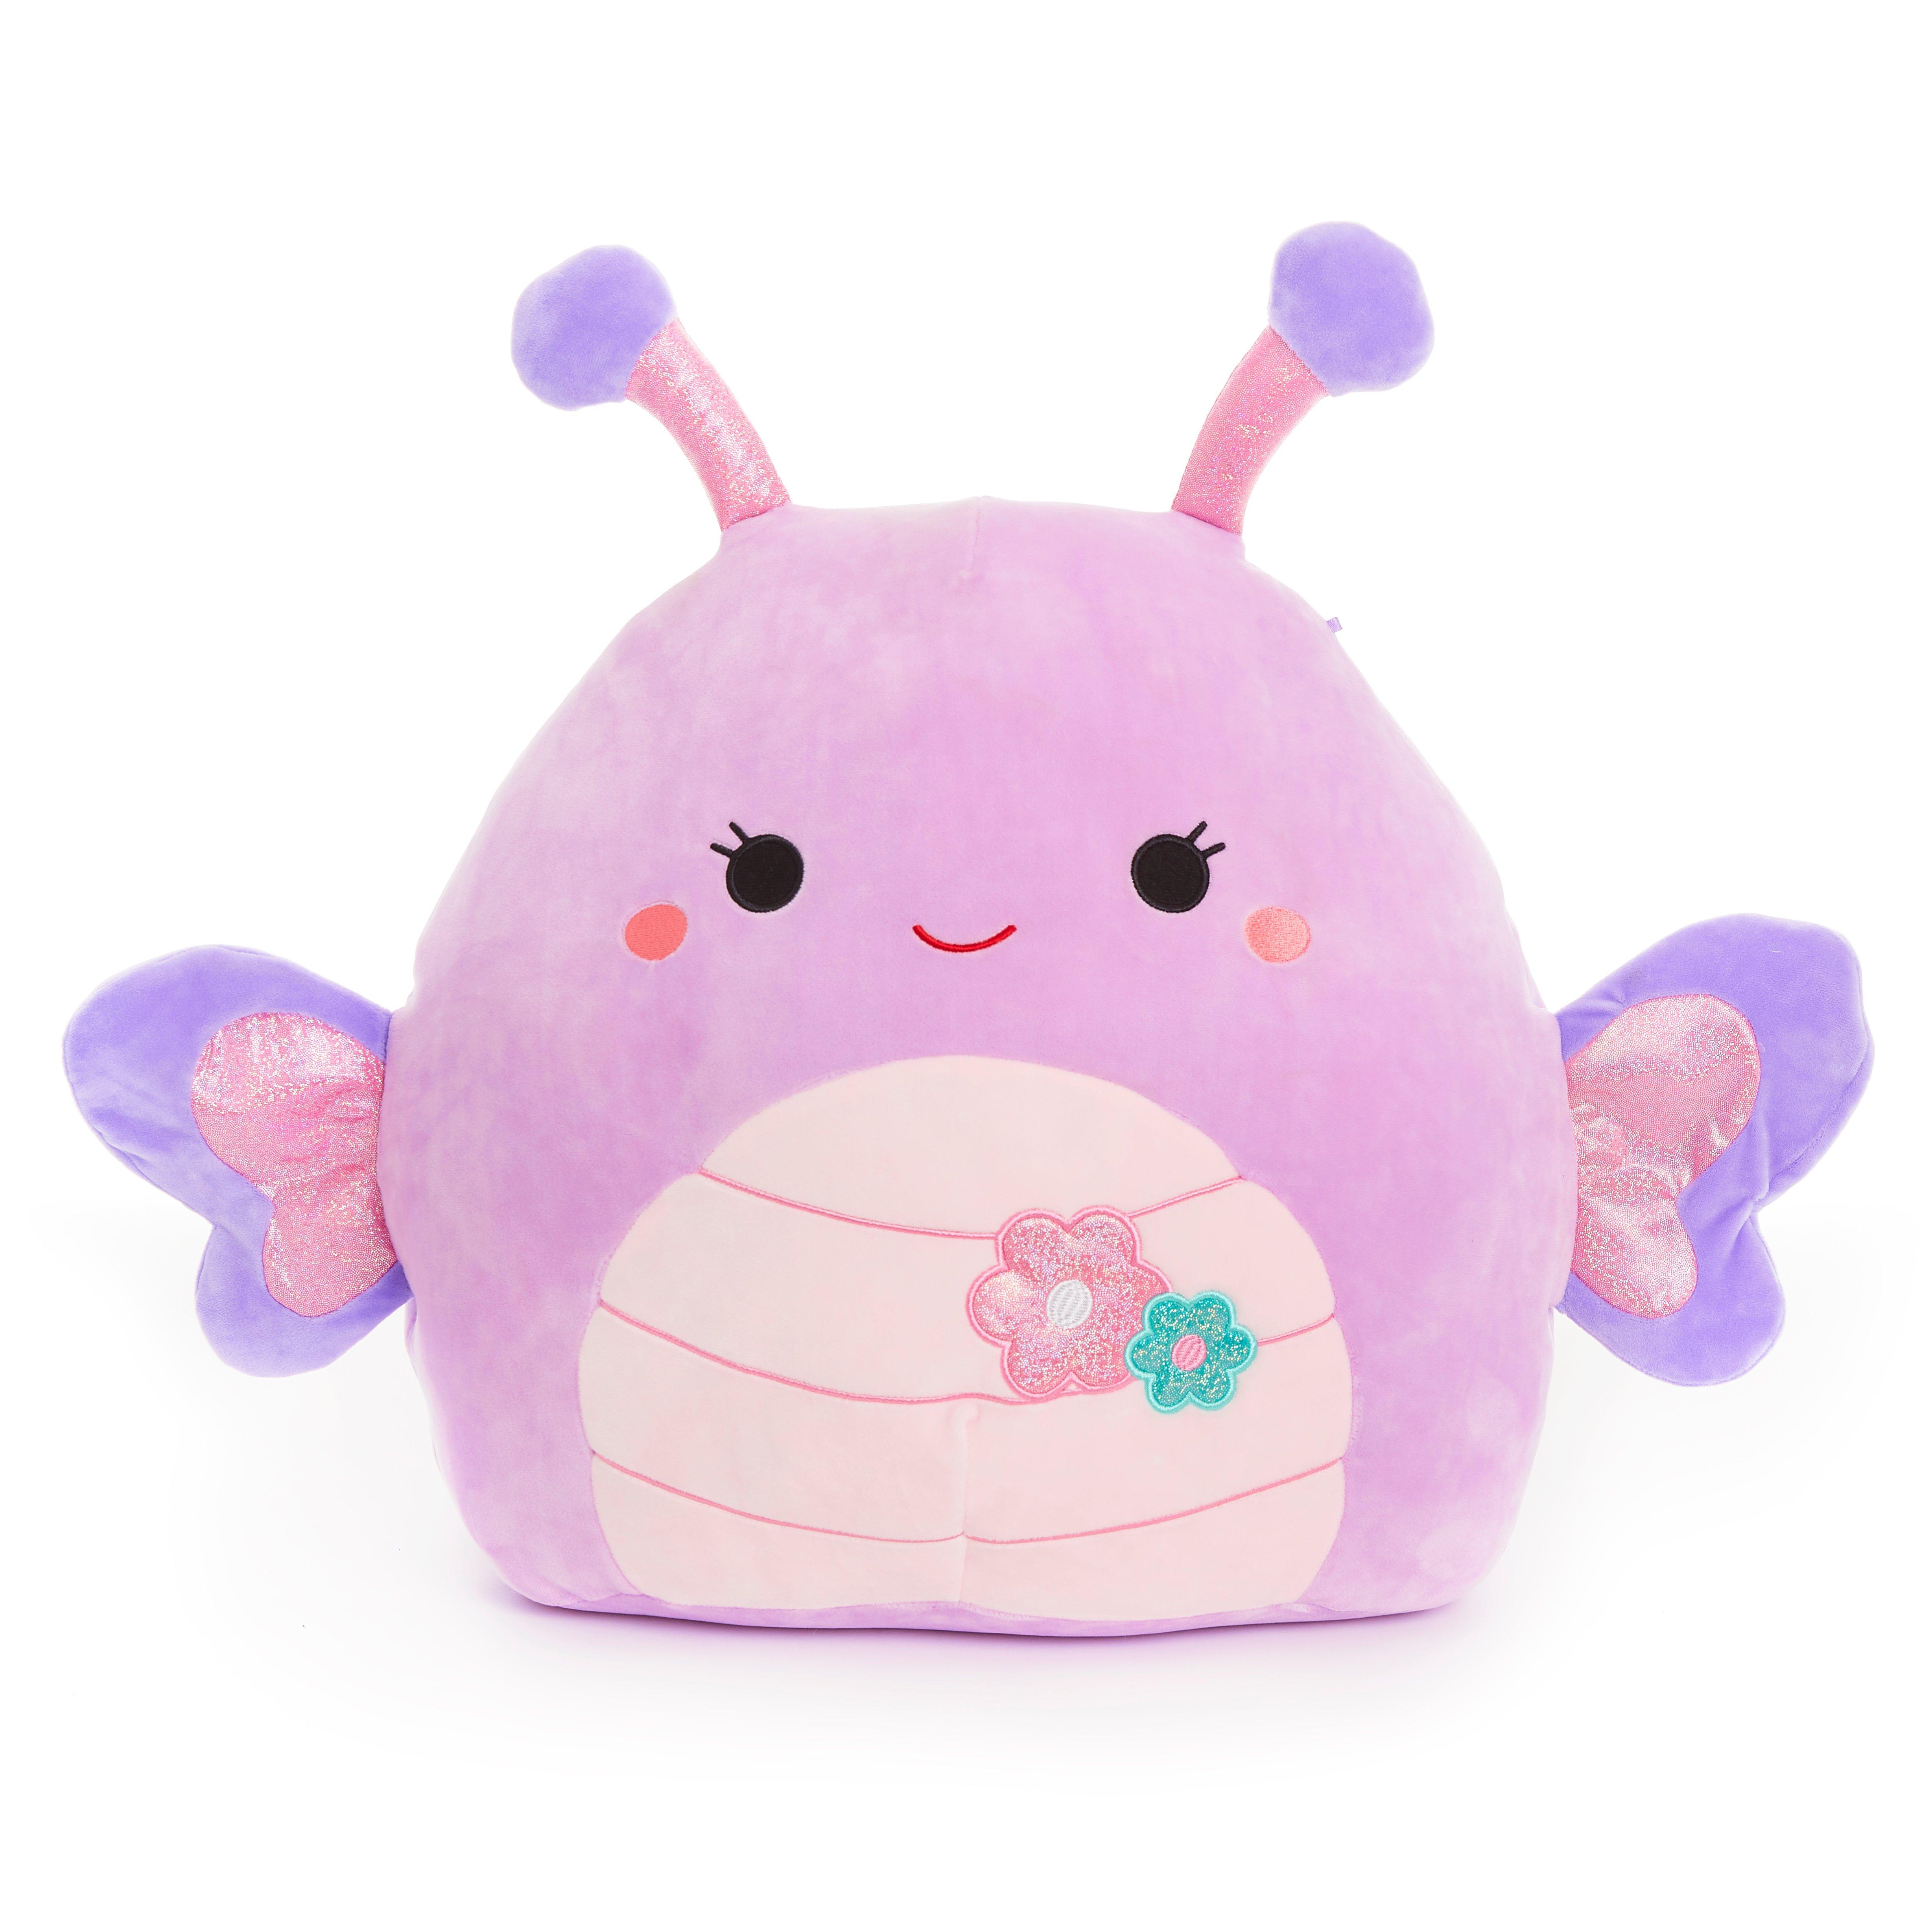 Squishmallows BUTTERFLY ‘Brenda The Butterfly’ Super Soft Plush Toy BRAND NEW 